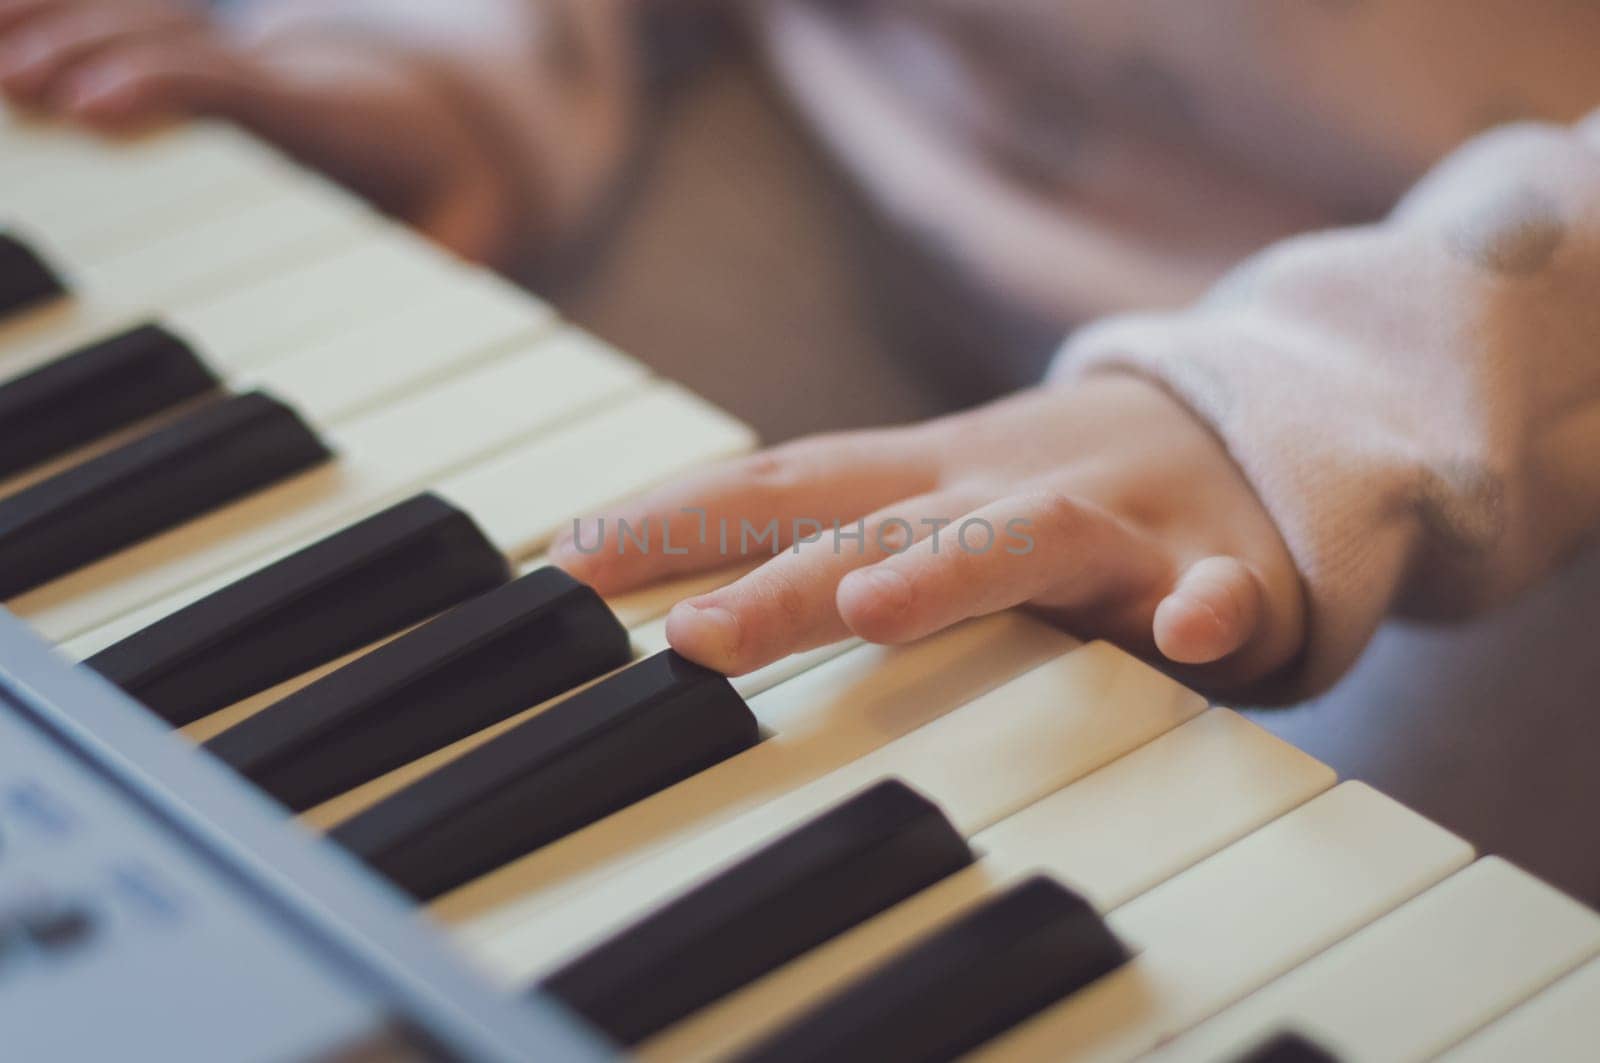 The hands of a little caucasian girl presses the keys on an electric piano while sitting on a sofa in the room, close-up side view. Music education concept.